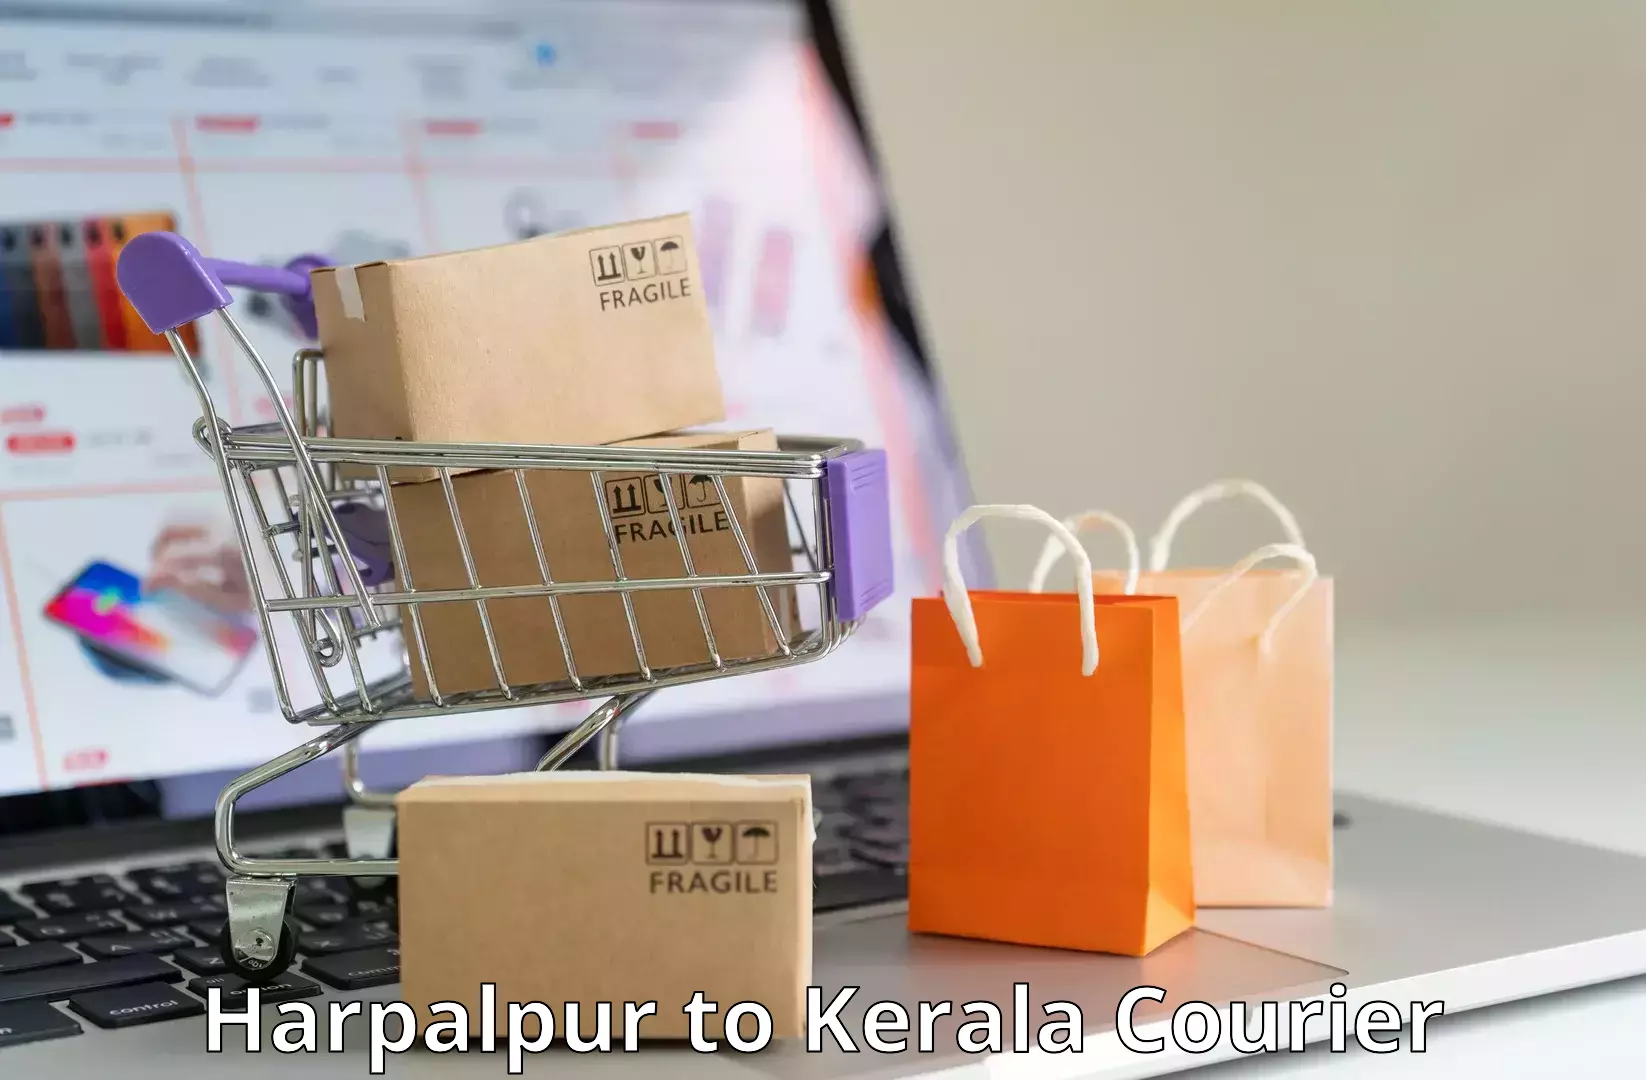 Advanced parcel tracking Harpalpur to Kerala